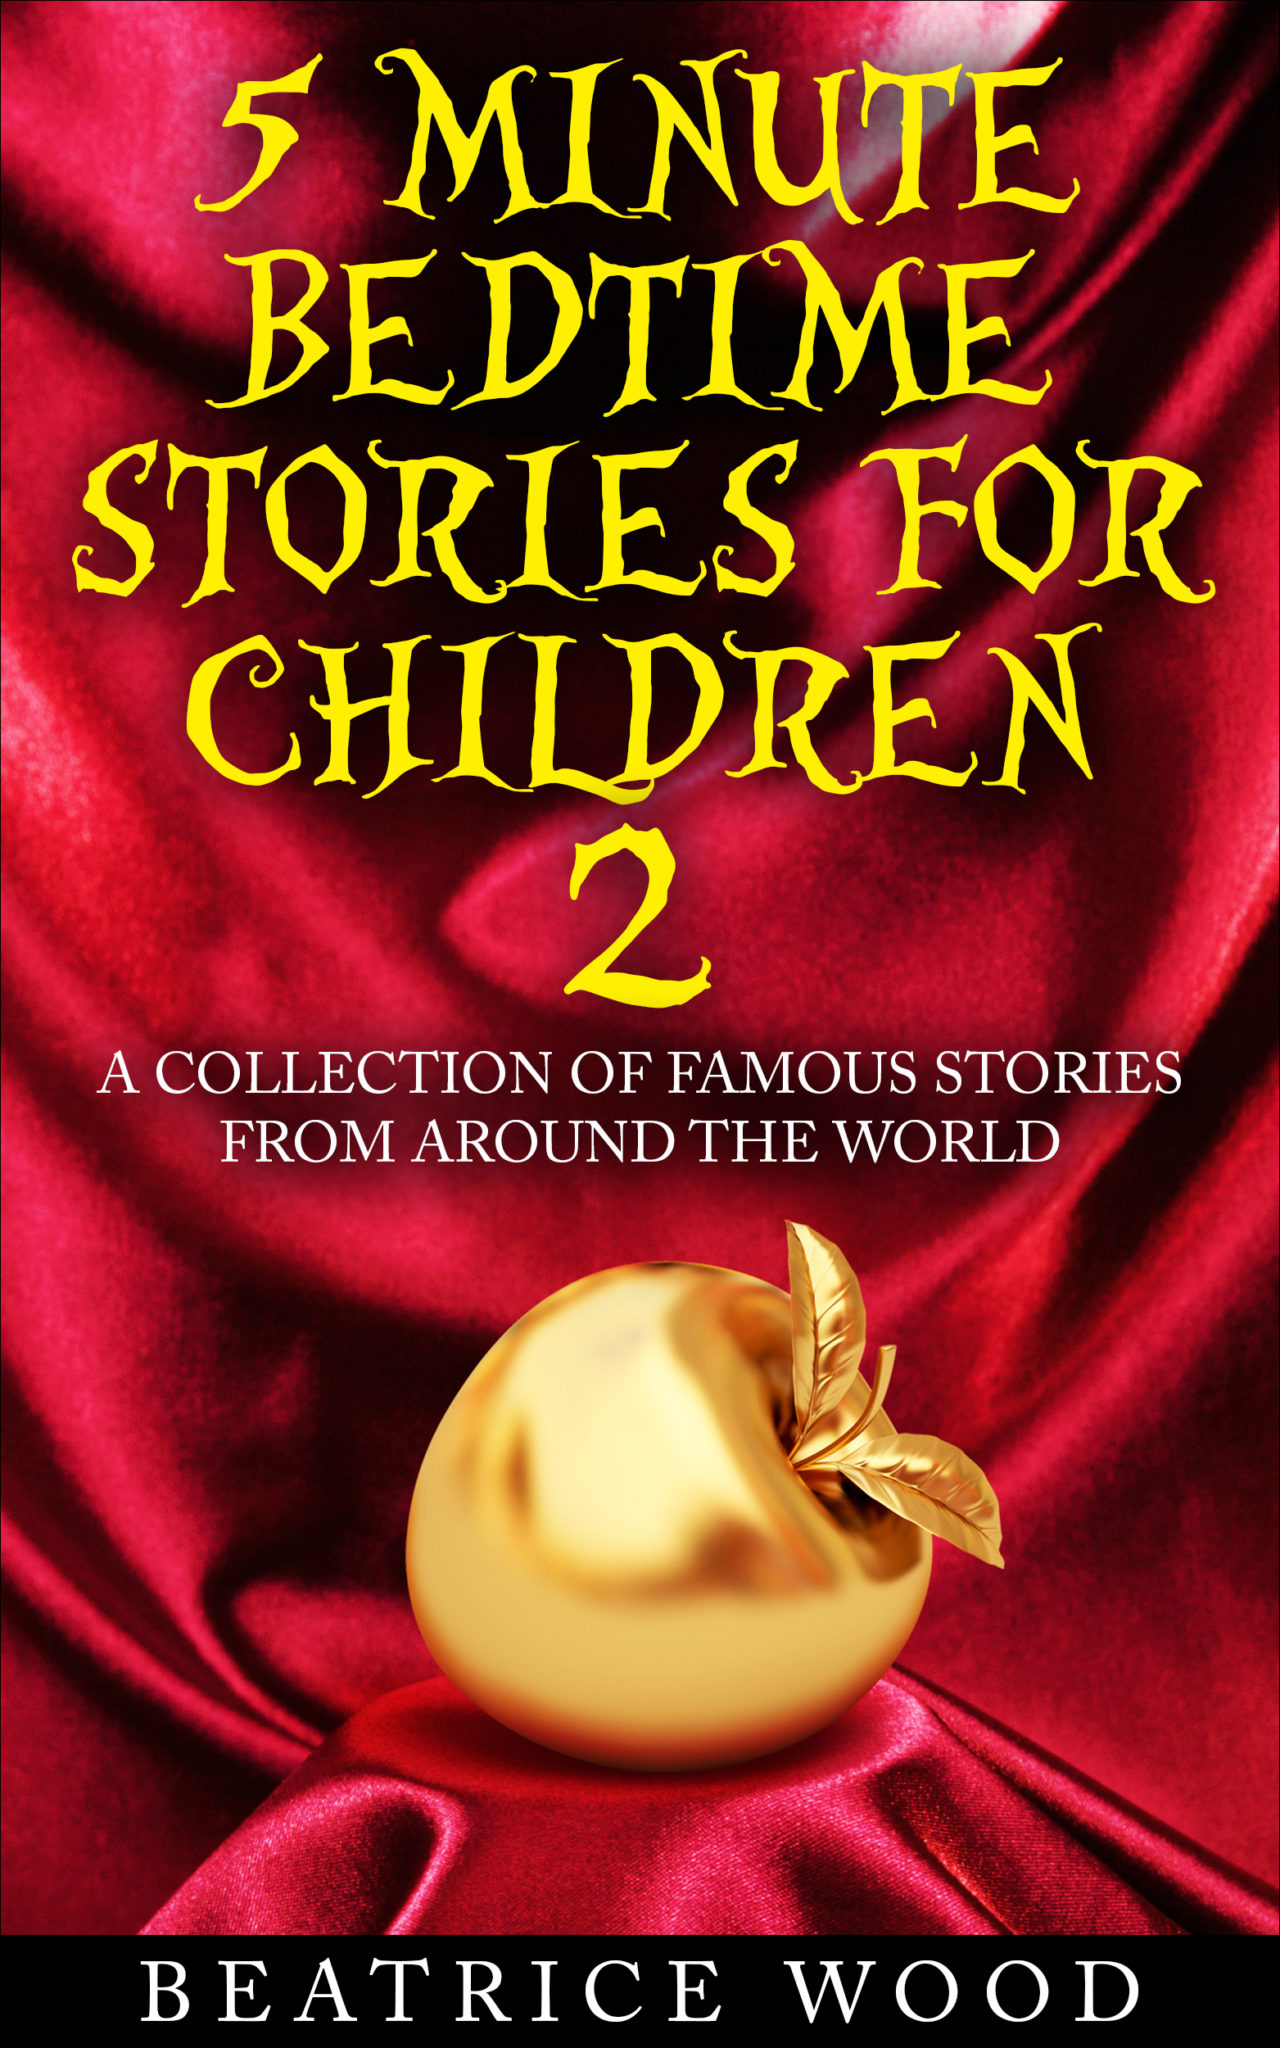 FREE: 5 Minute Bedtime Stories For Children Vol.2 by Beatrice Wood